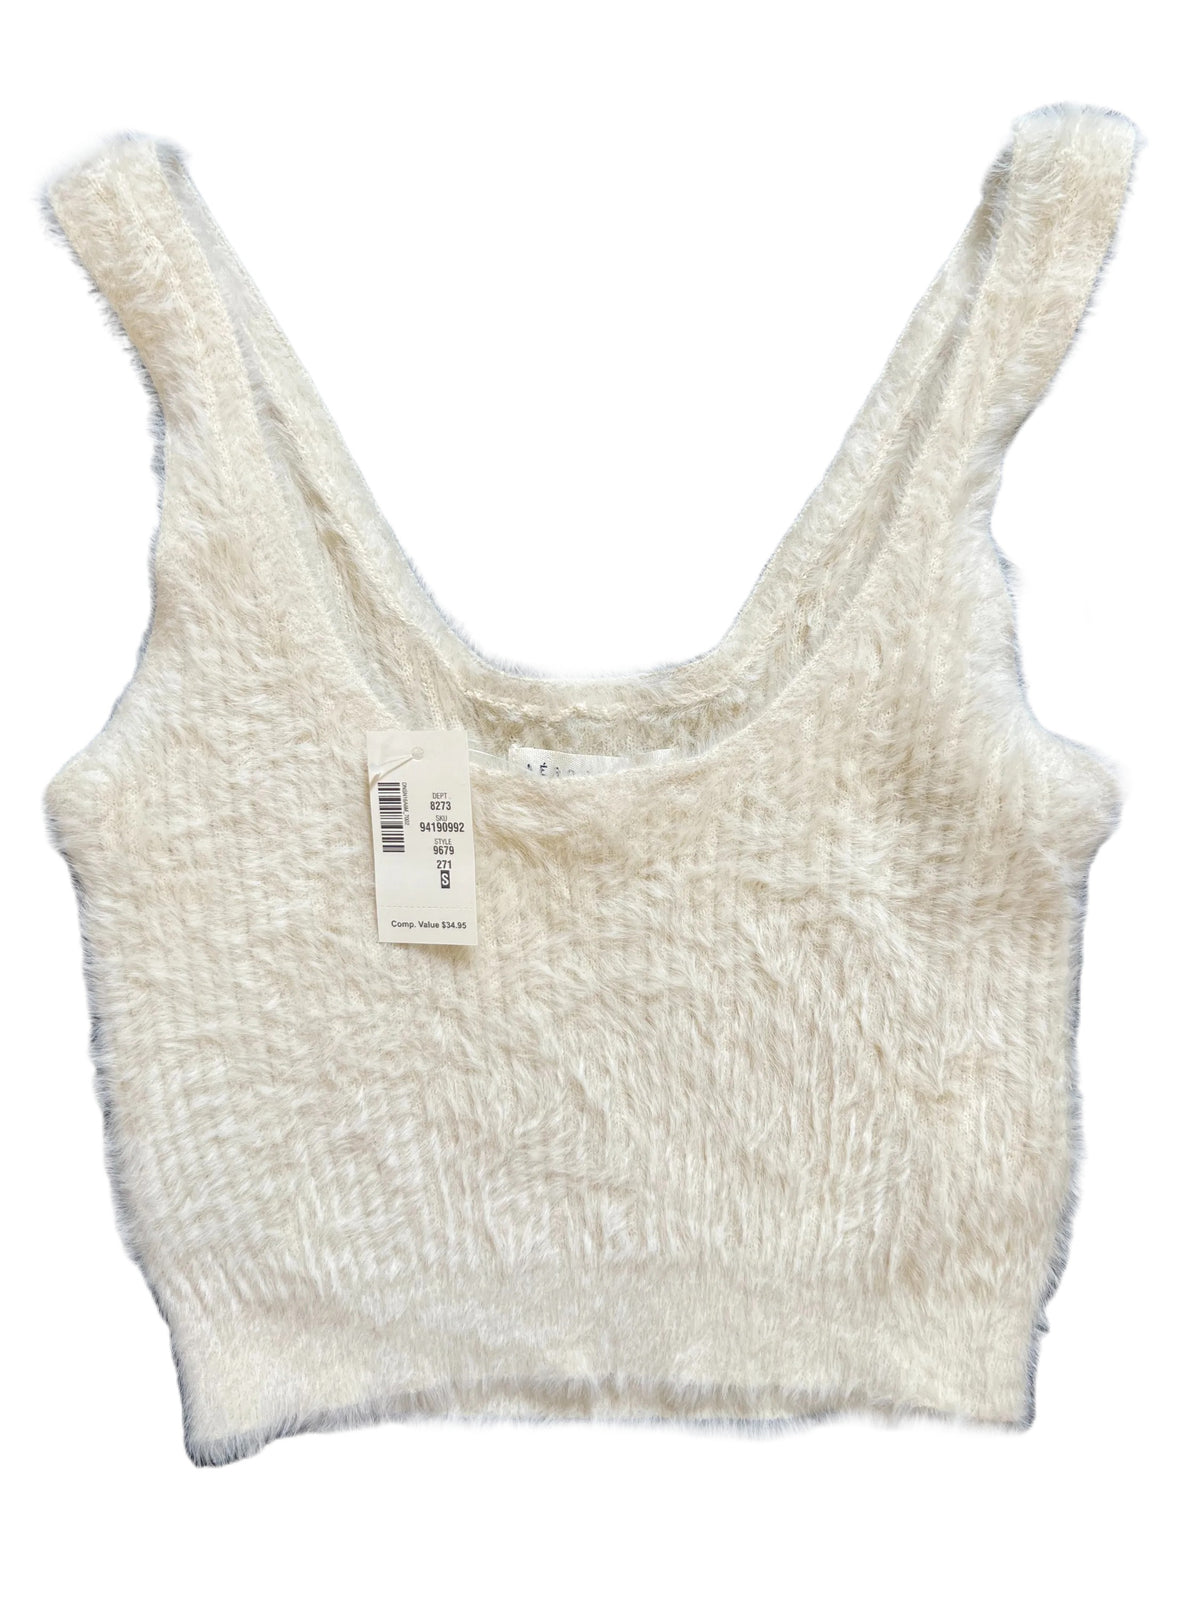 Aeropostale- Off White Fuzzy Tank Top New With Tags!